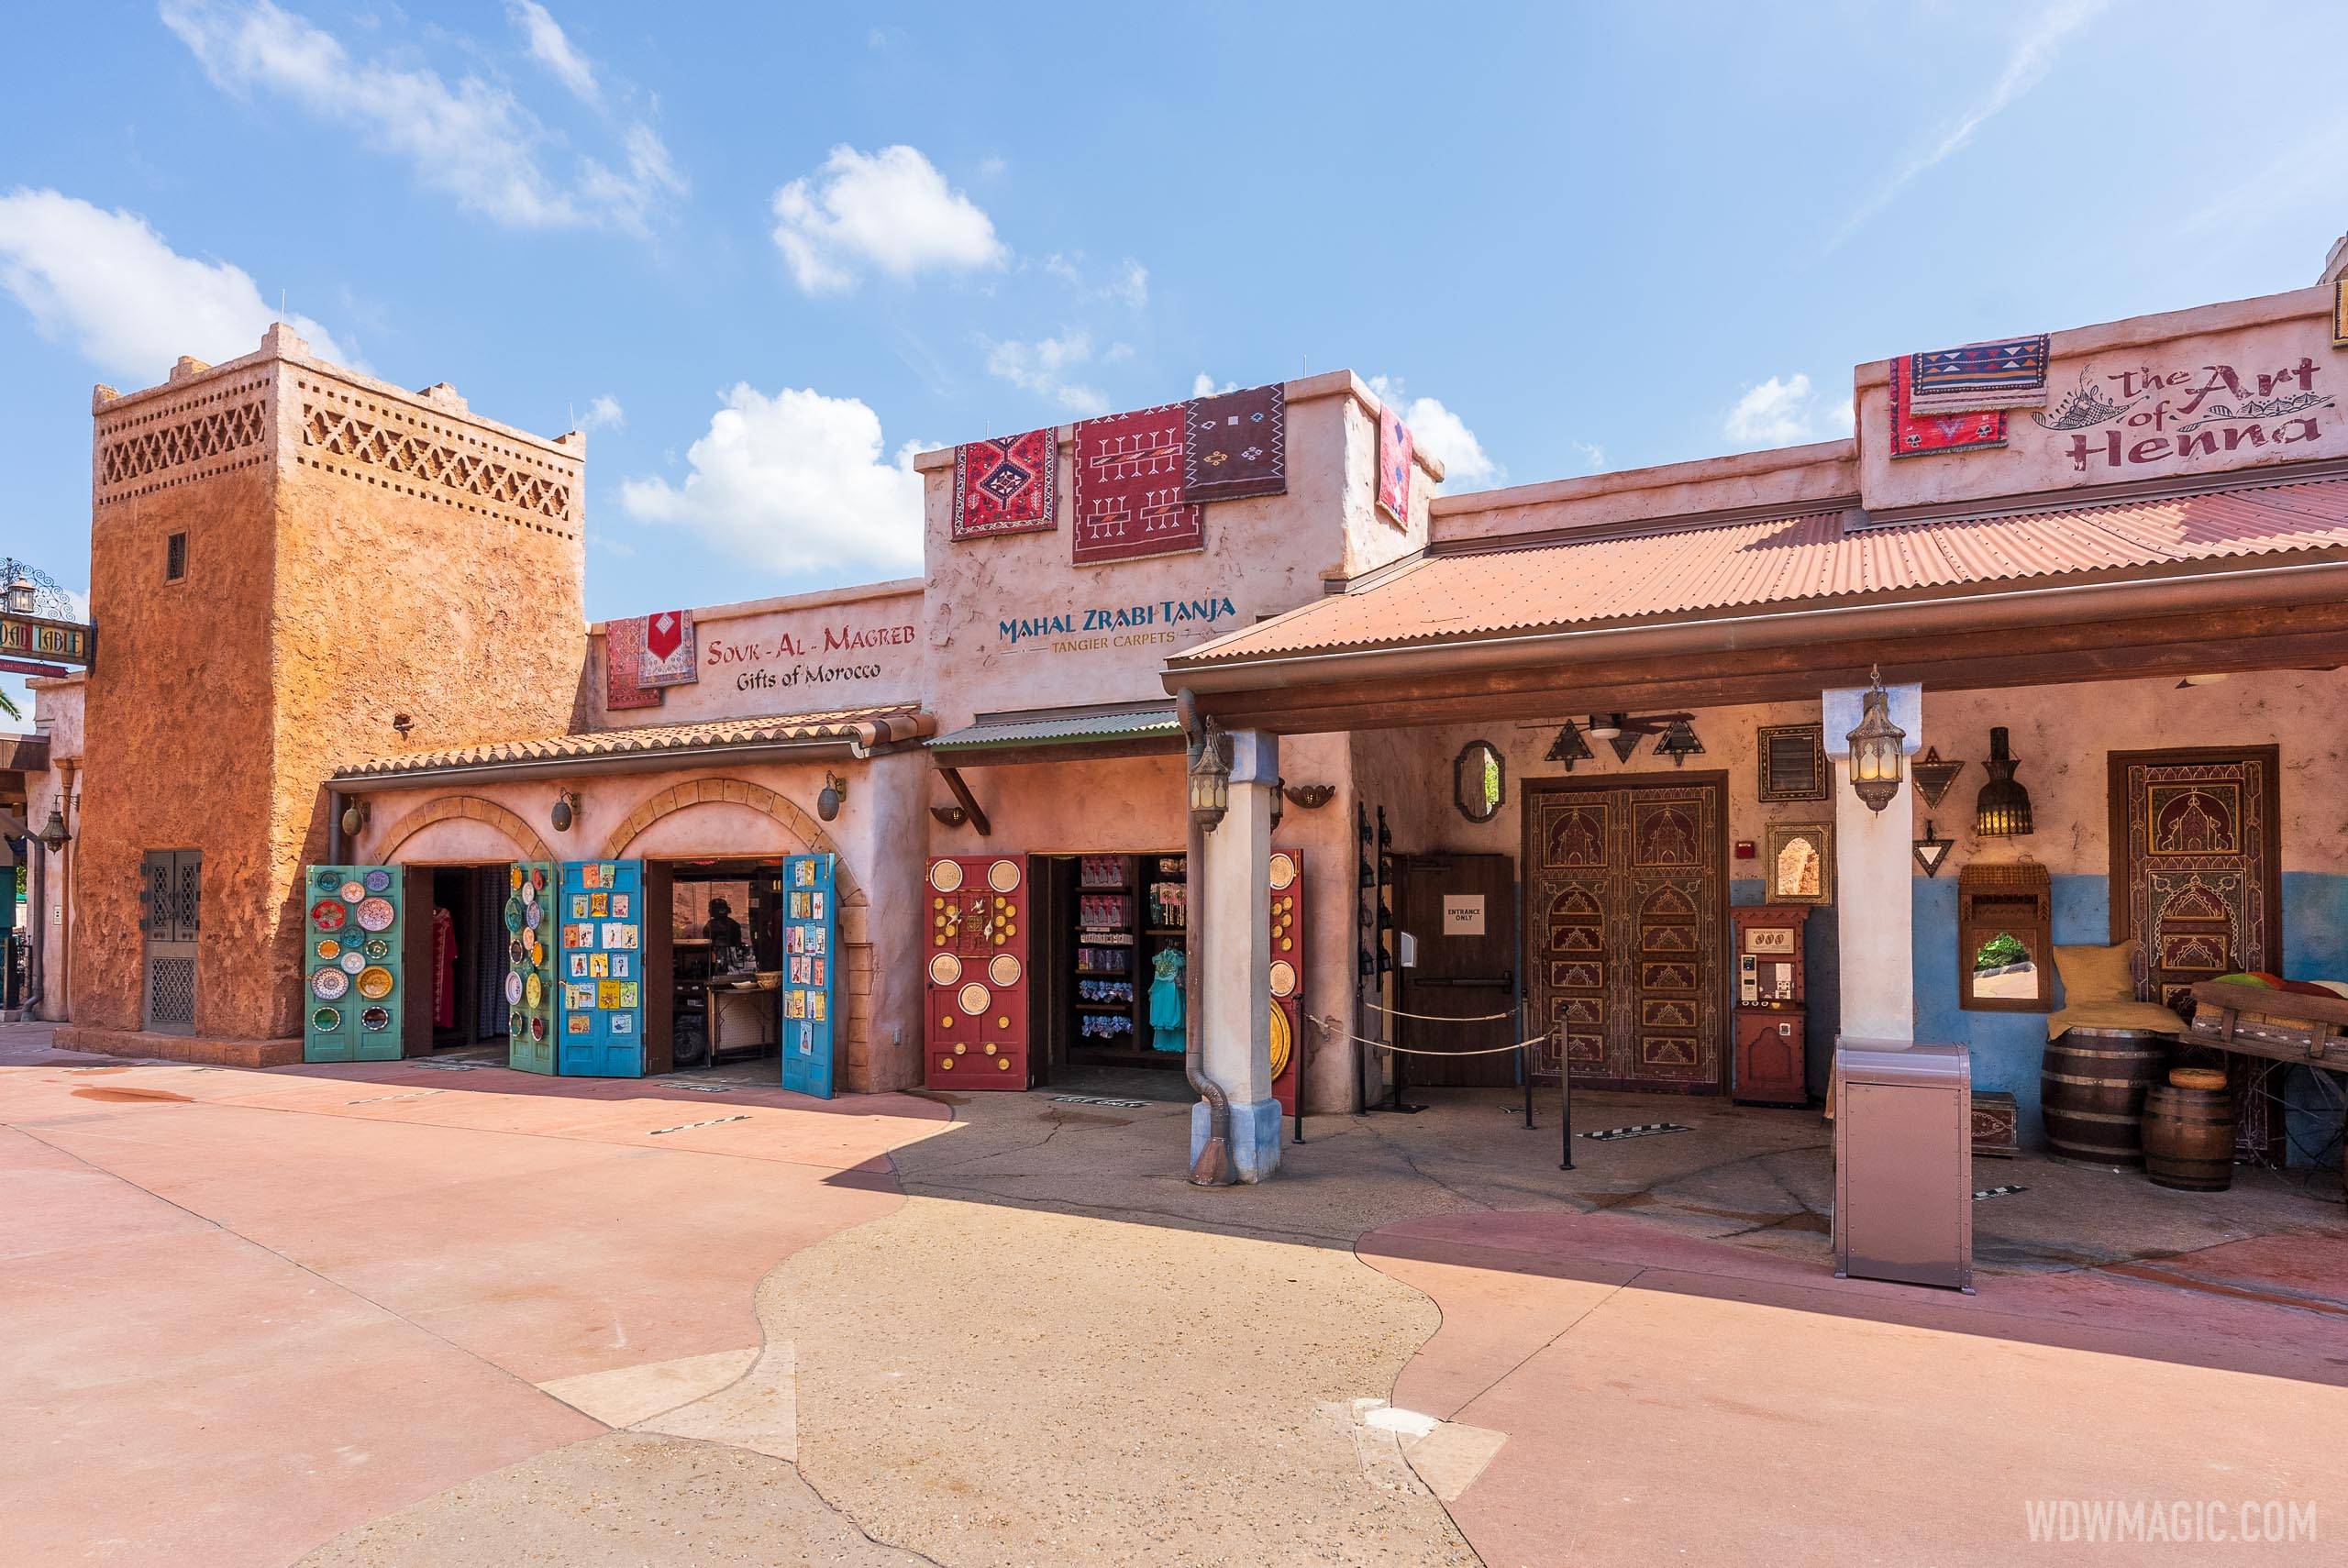 Morocco Pavilion improvements continue with new concrete work and signage above the retail kiosks alongside the promenade